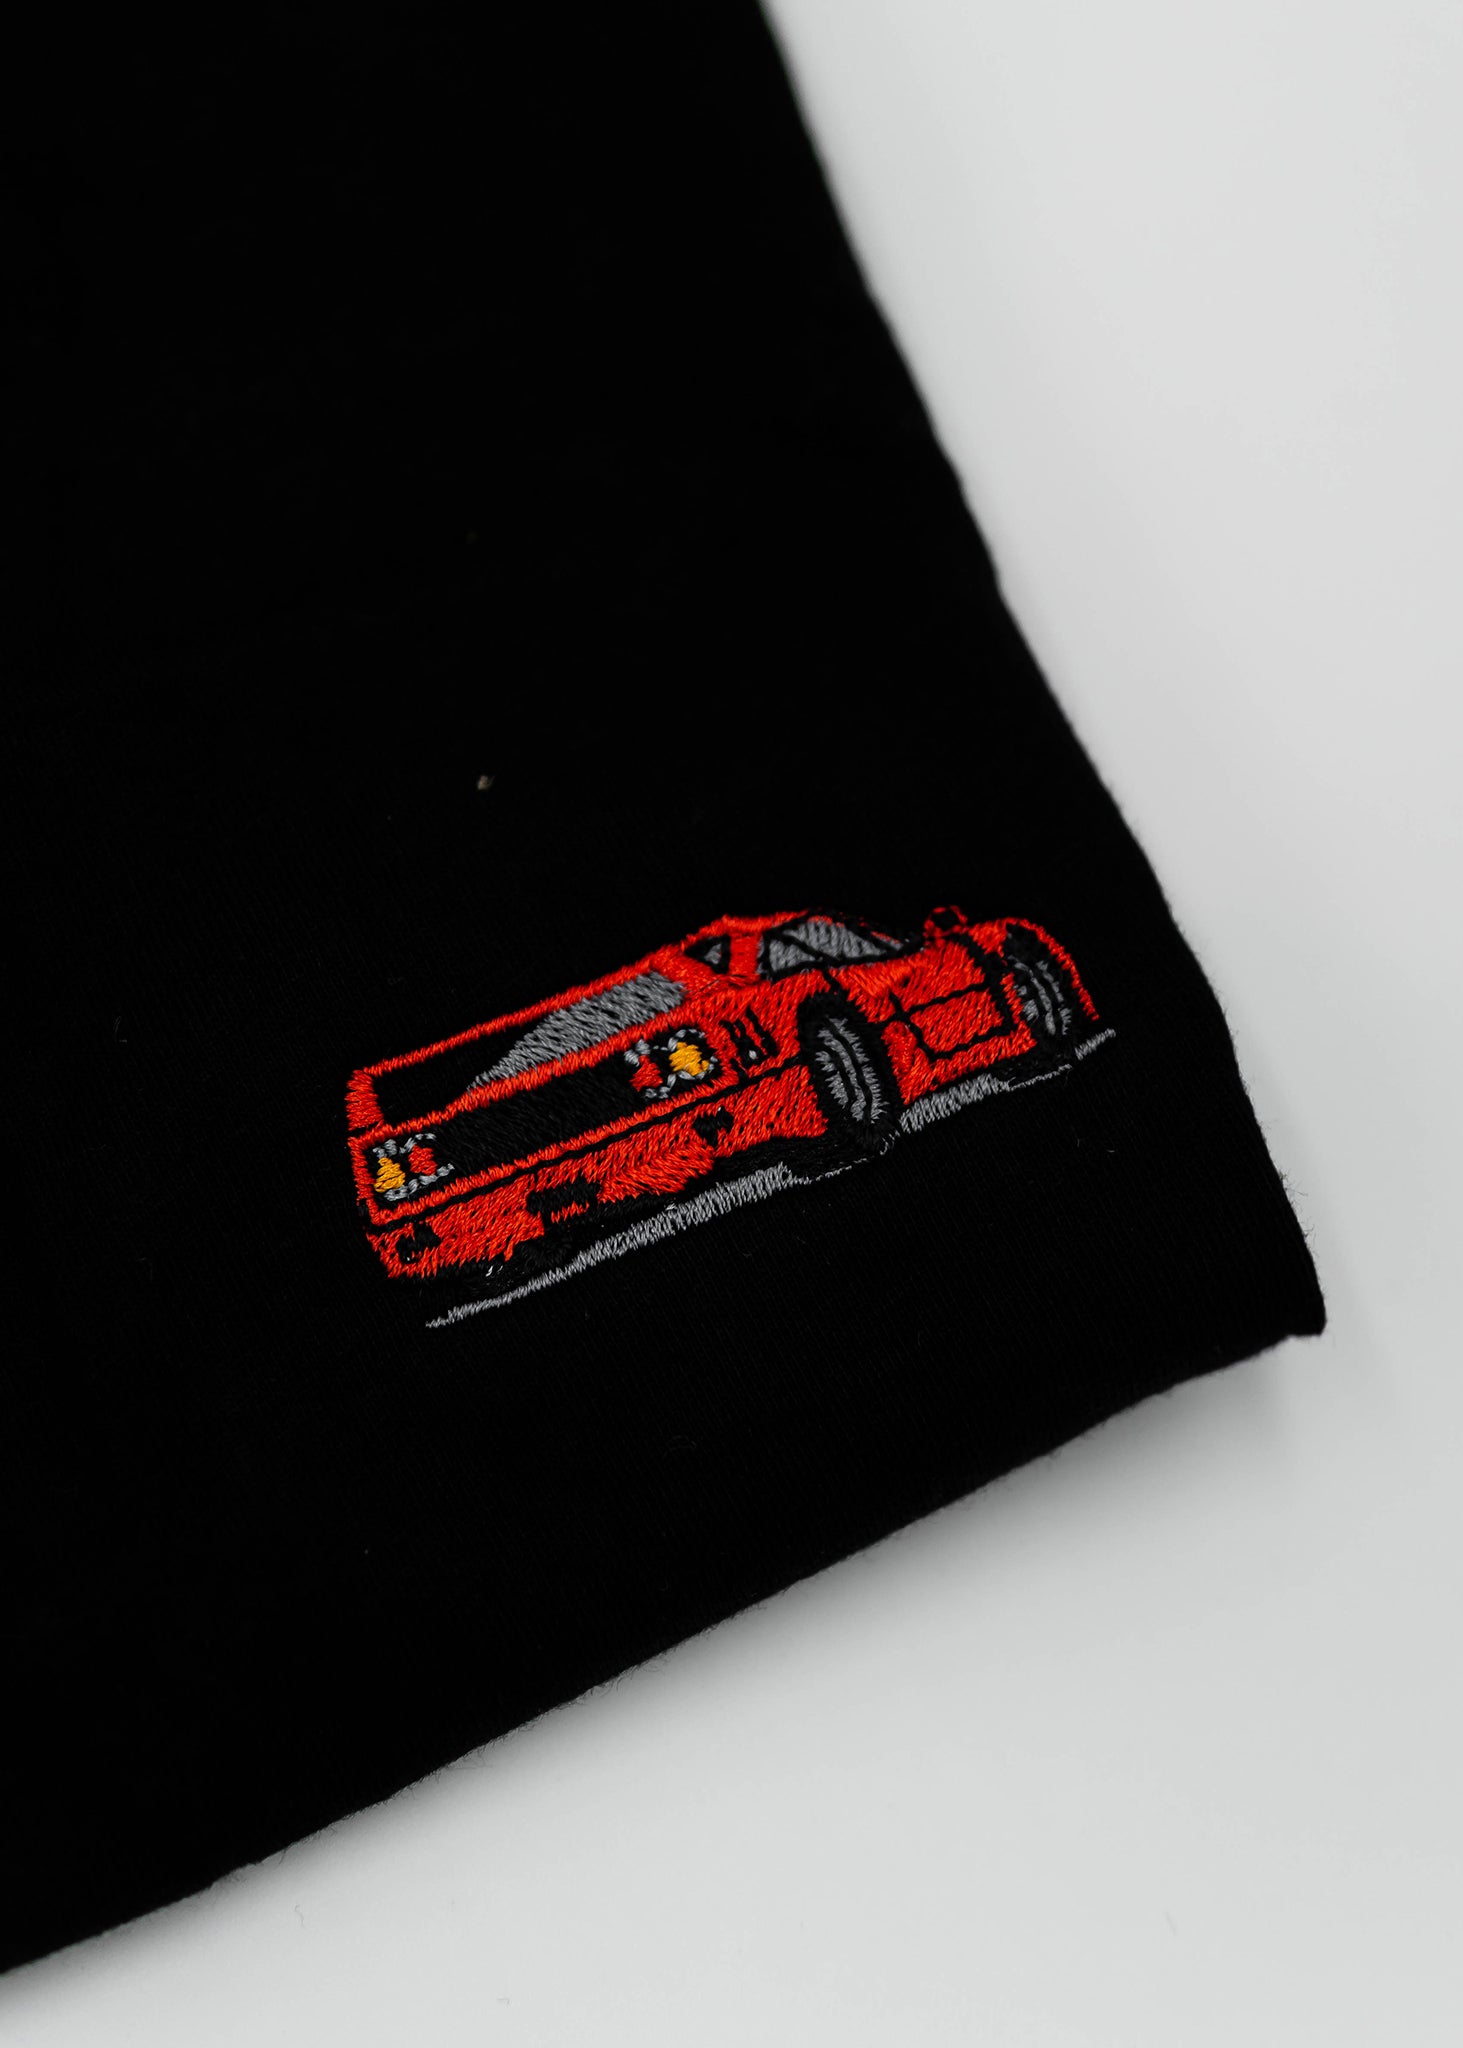 Close up of an embroidered F40 on a women's high quality cropped t-shirt. Photo shows the detailed embroidery of a red F40. Fabric composition of this tee is 100% cotton. The material is very soft, stretchy, and non-transparent. The style of this tshirt is a crewneck, short sleeve, cropped at the waist, with embroidery on the left chest.